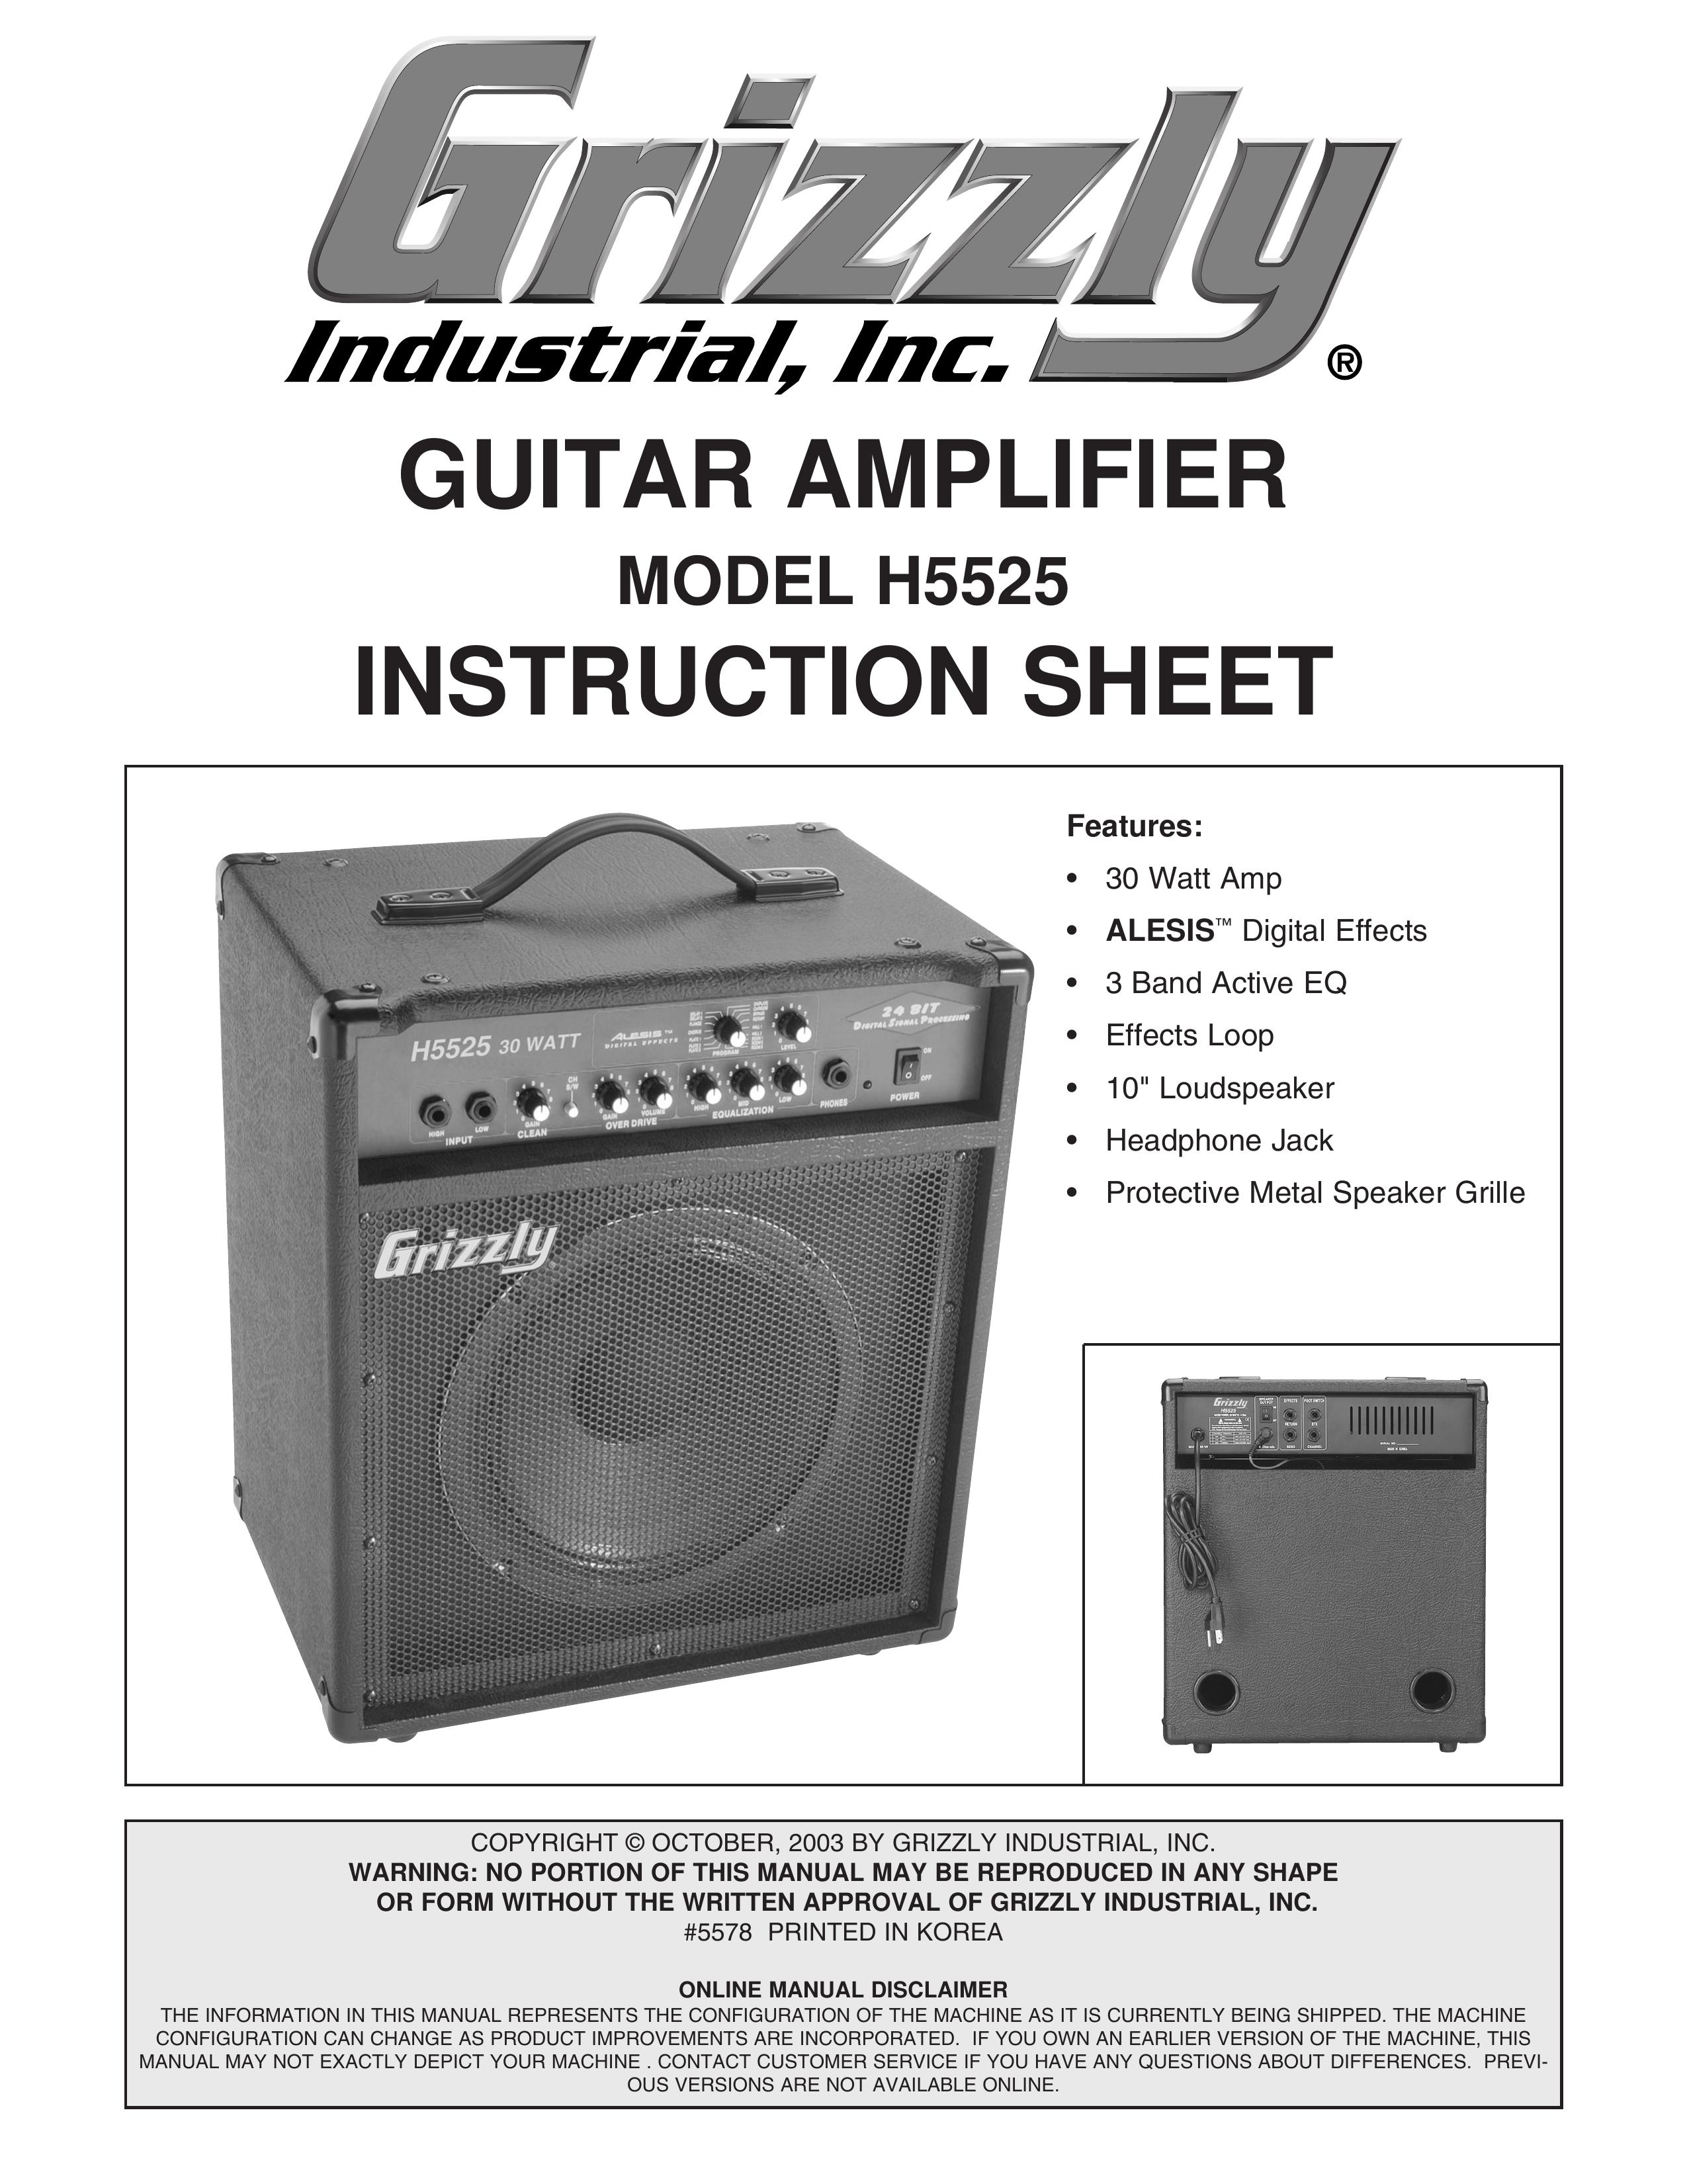 Grizzly H5525 Musical Instrument Amplifier User Manual